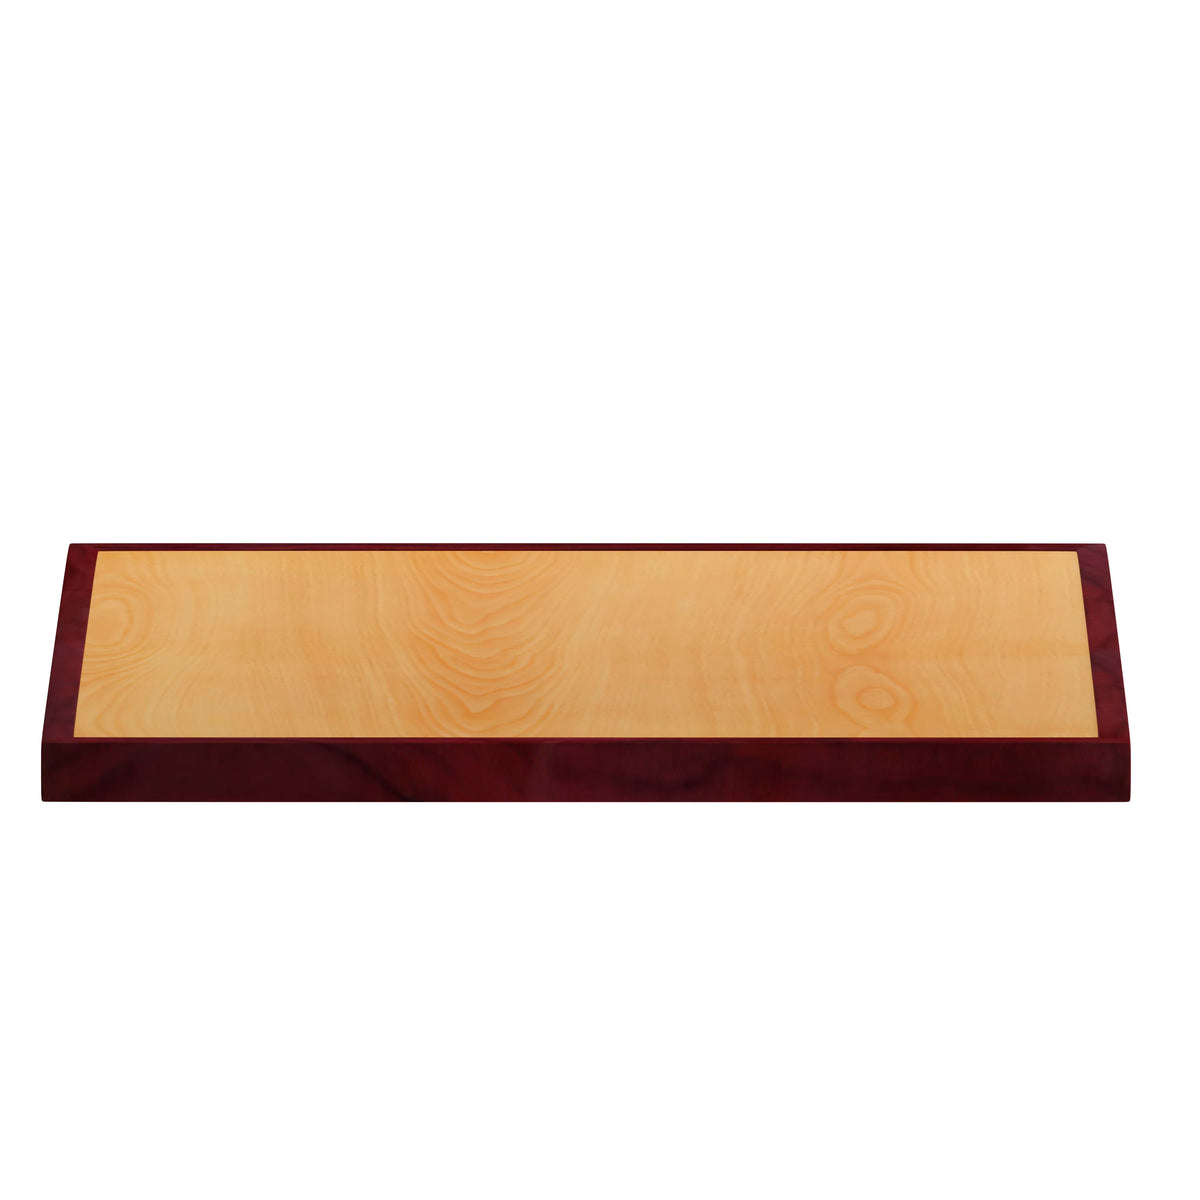 36inch Square 2-Tone Cherry & Mahogany Resin Table Top with 2inch Thick Drop-Lip